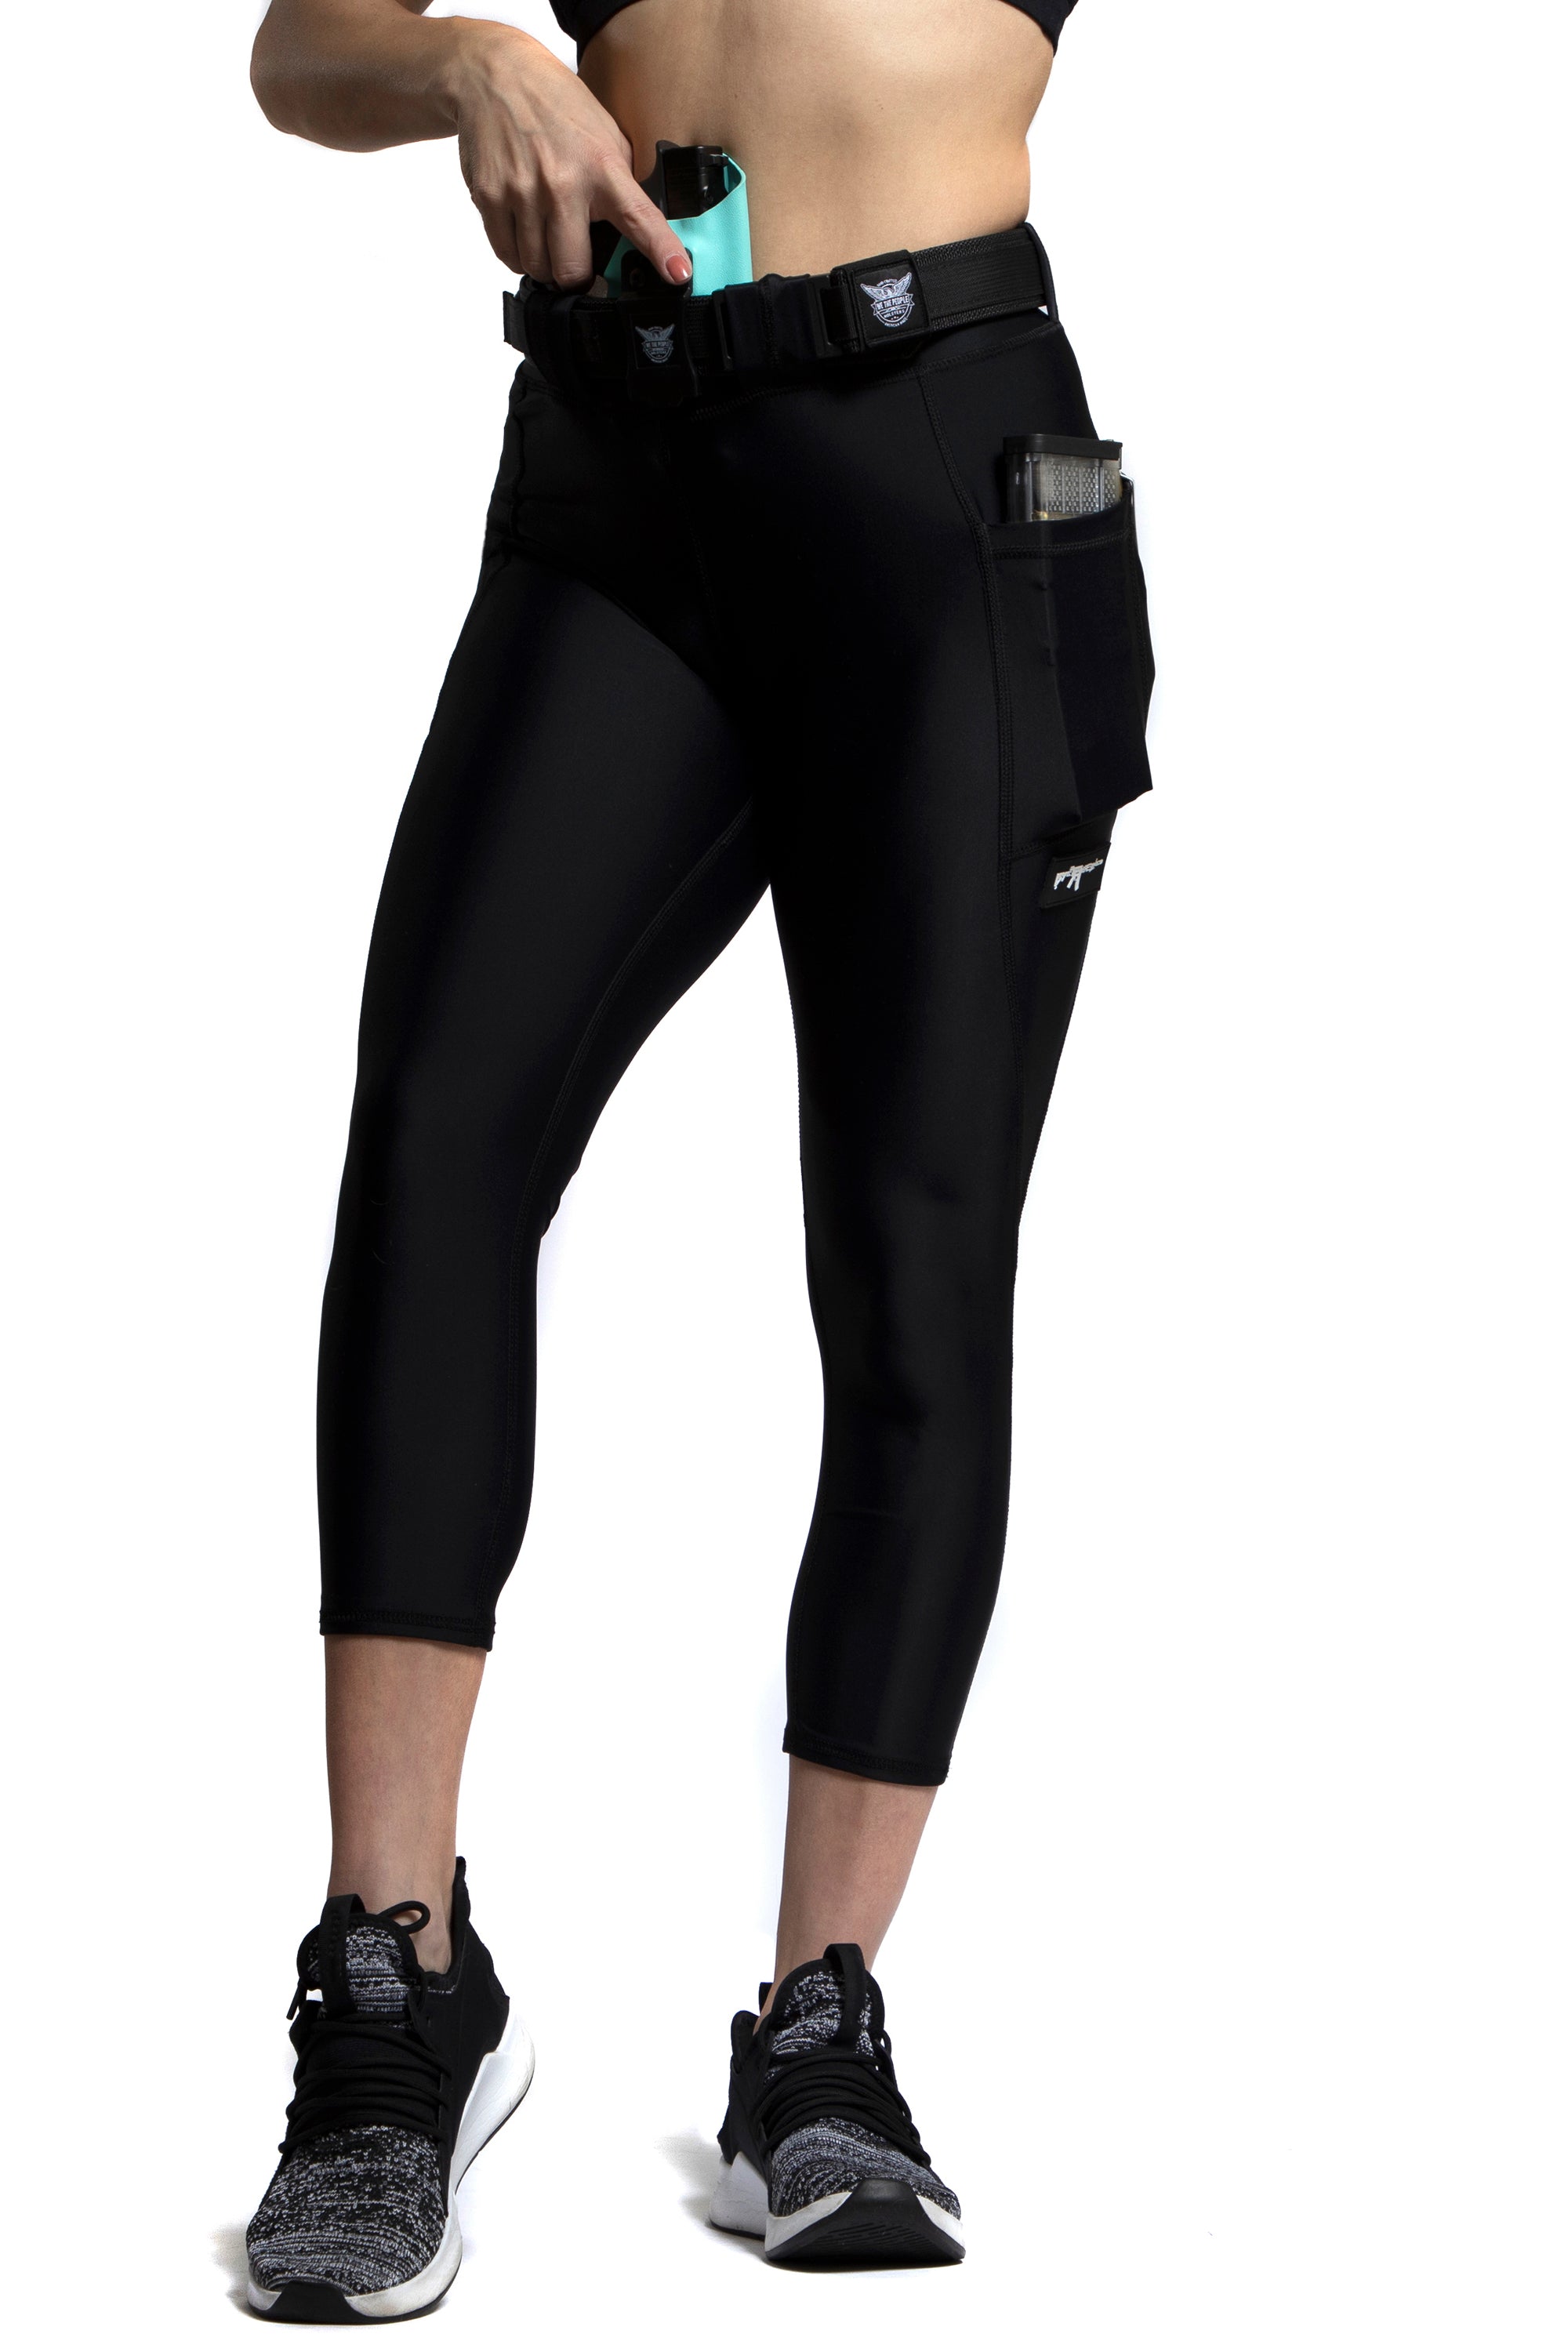 Conceal Carry Leggings – SWEAT AND SHAPE BY GRO FIT